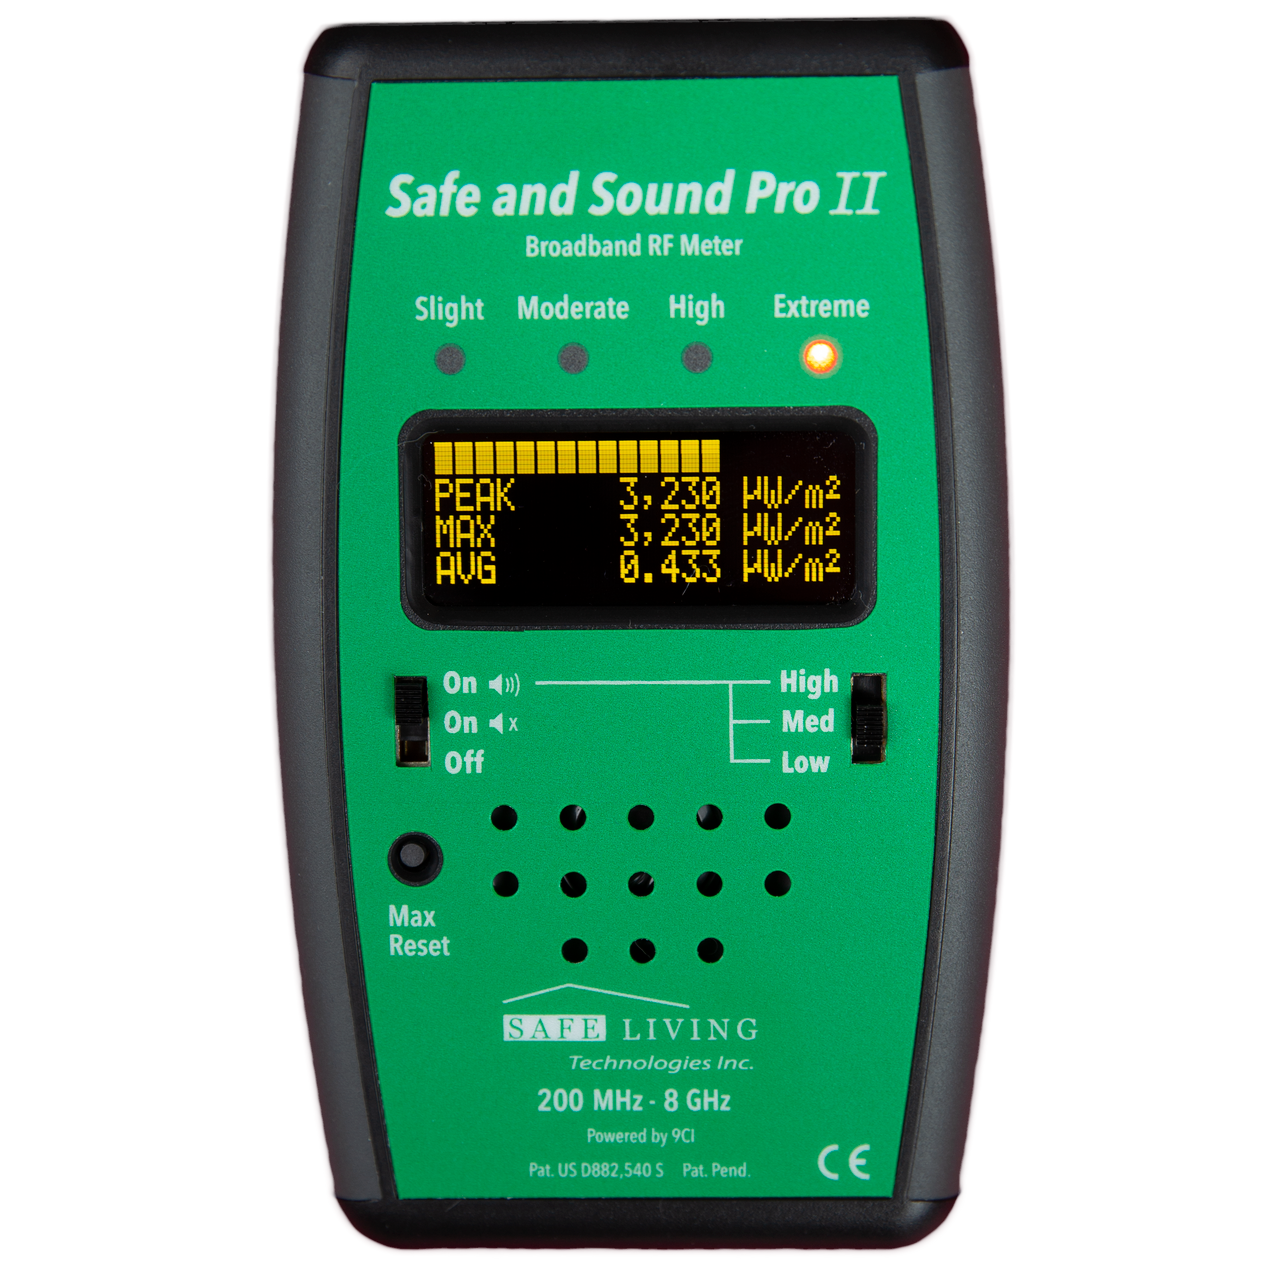 12GHz Safe and Sound PRO RF Meter 200MHz Smart Meters Perfect for Measuring Cell Phones WiFi Etc.